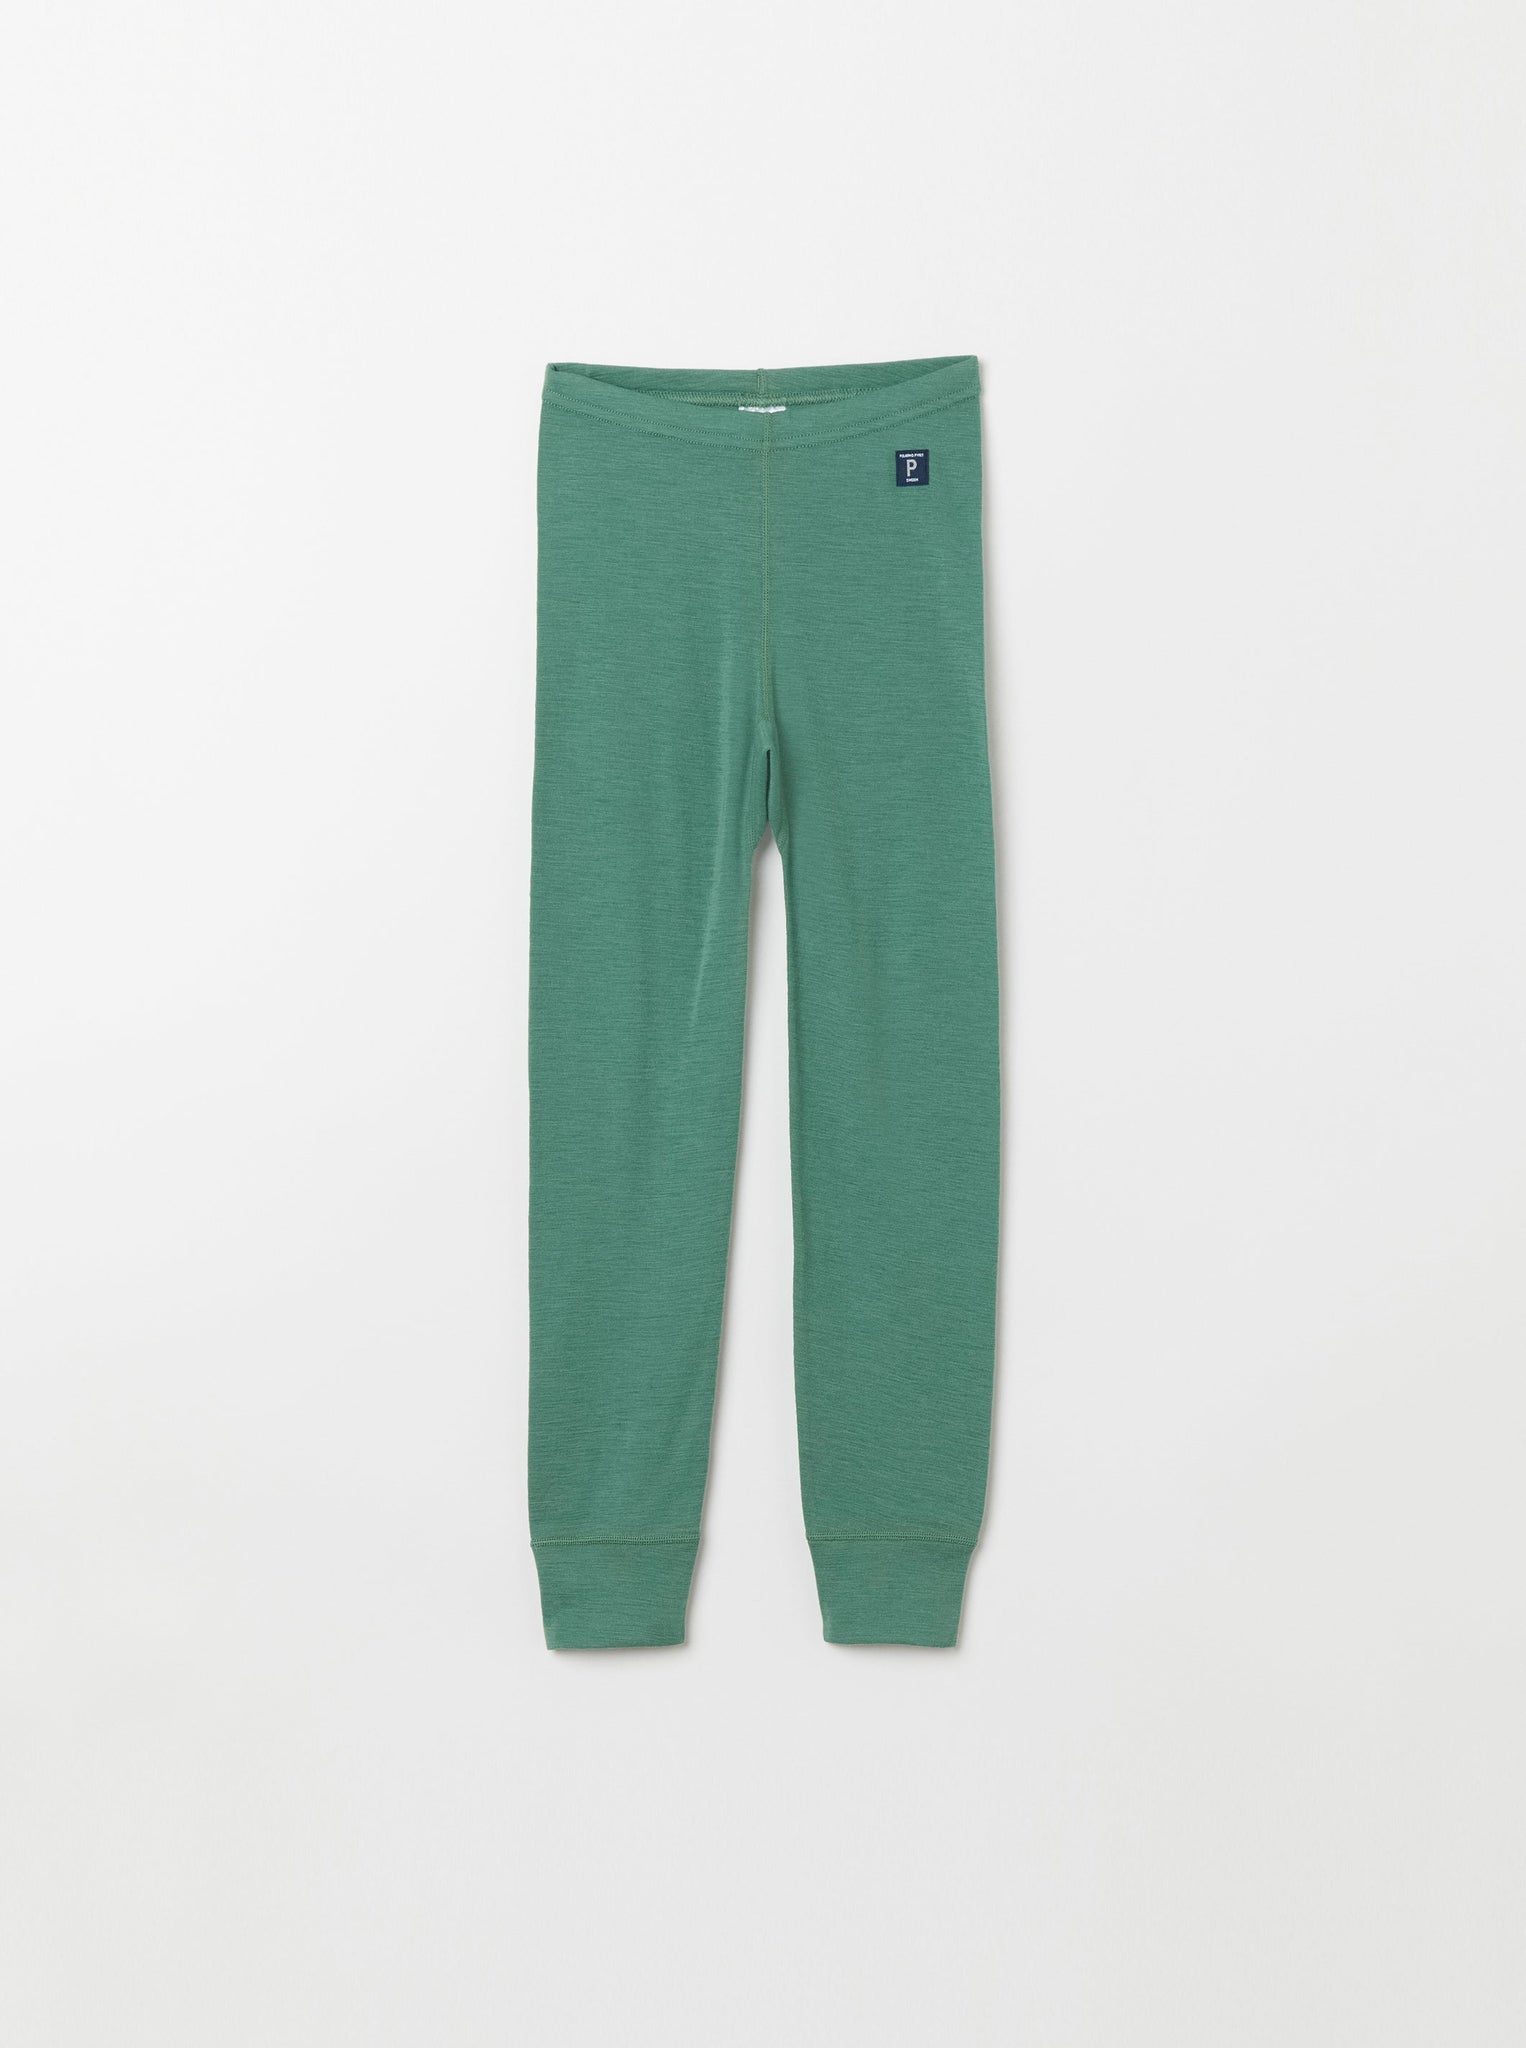 Merino Green Thermal Kids Long Johns from the Polarn O. Pyret kidswear collection. Quality kids clothing made to last.